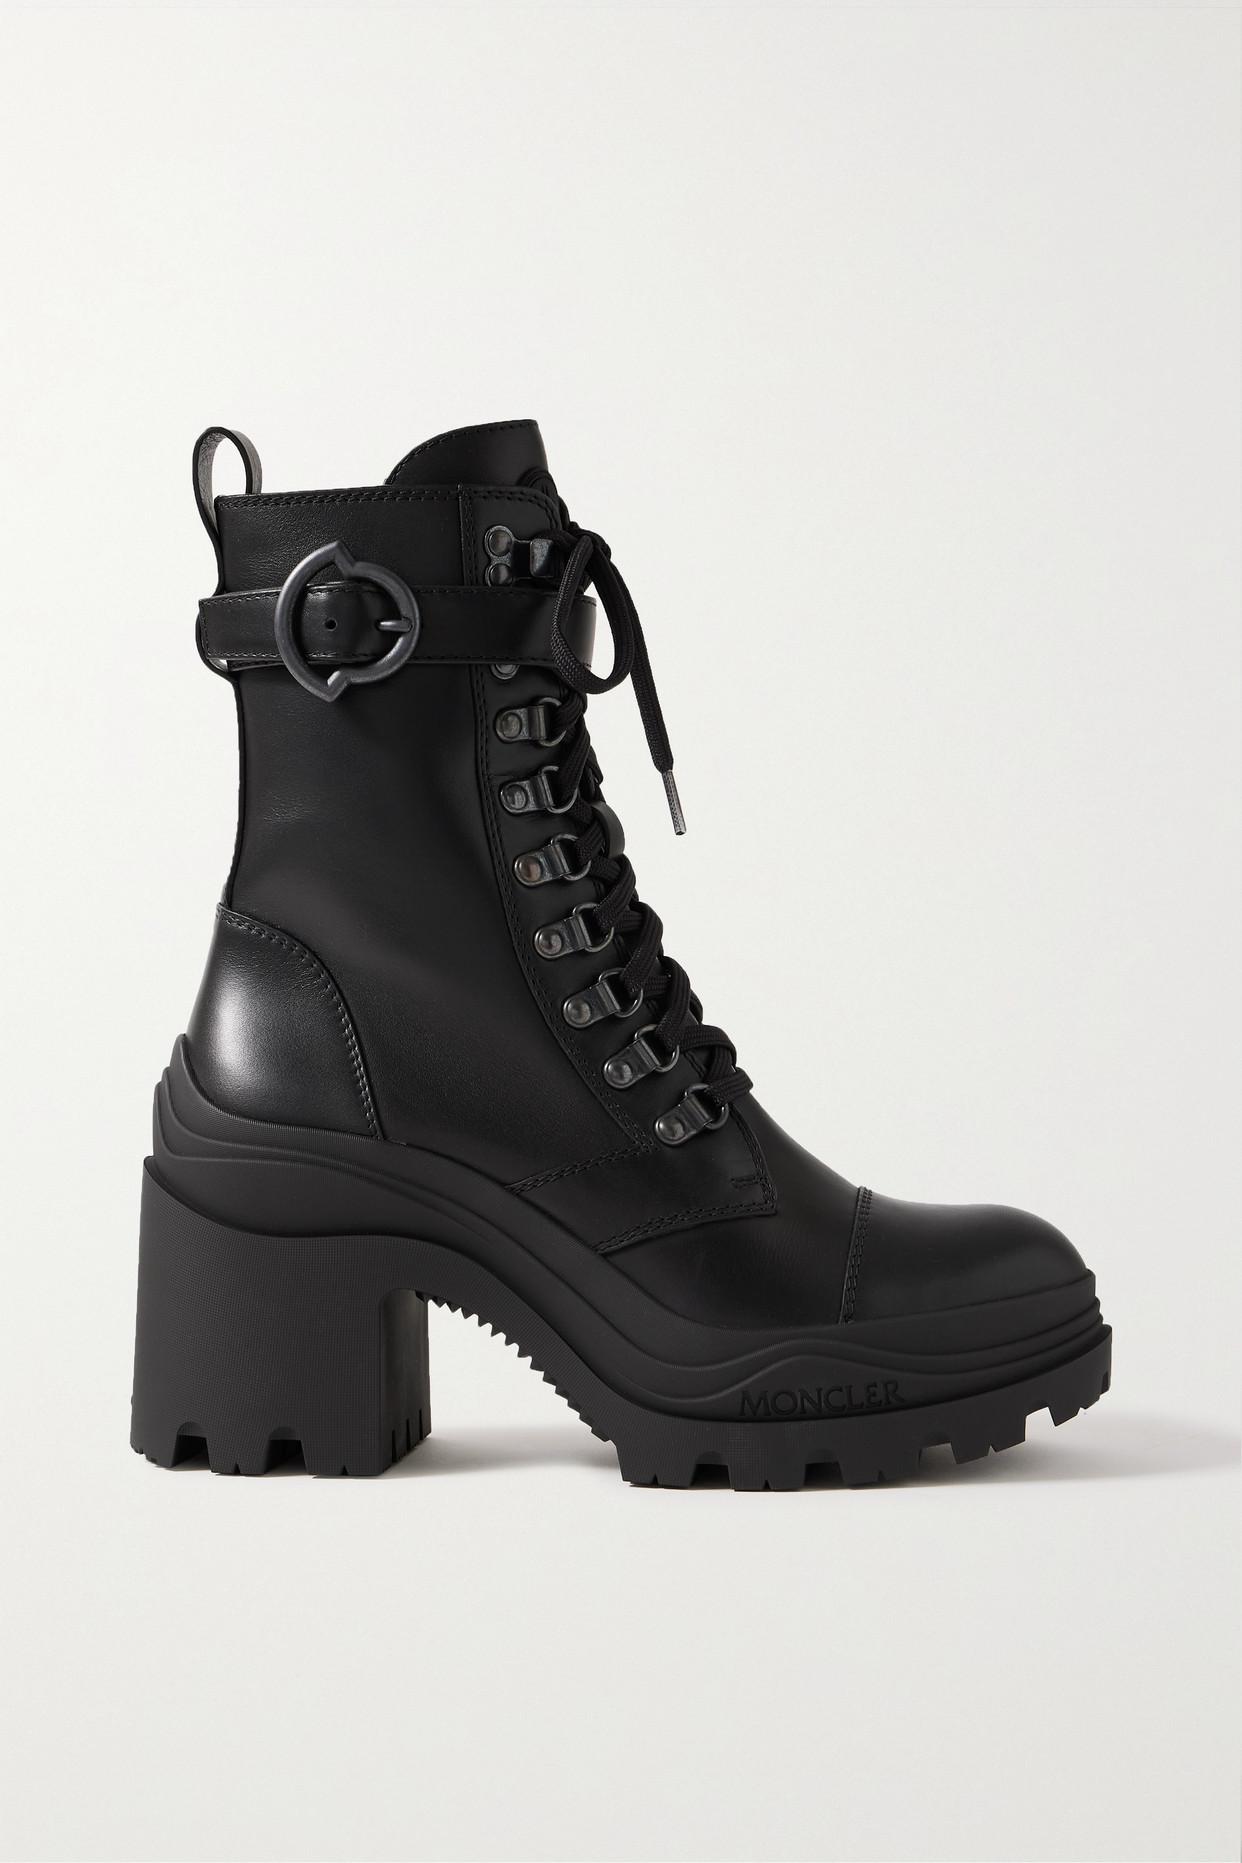 Moncler Envile Buckled Leather Combat Boots in Black | Lyst